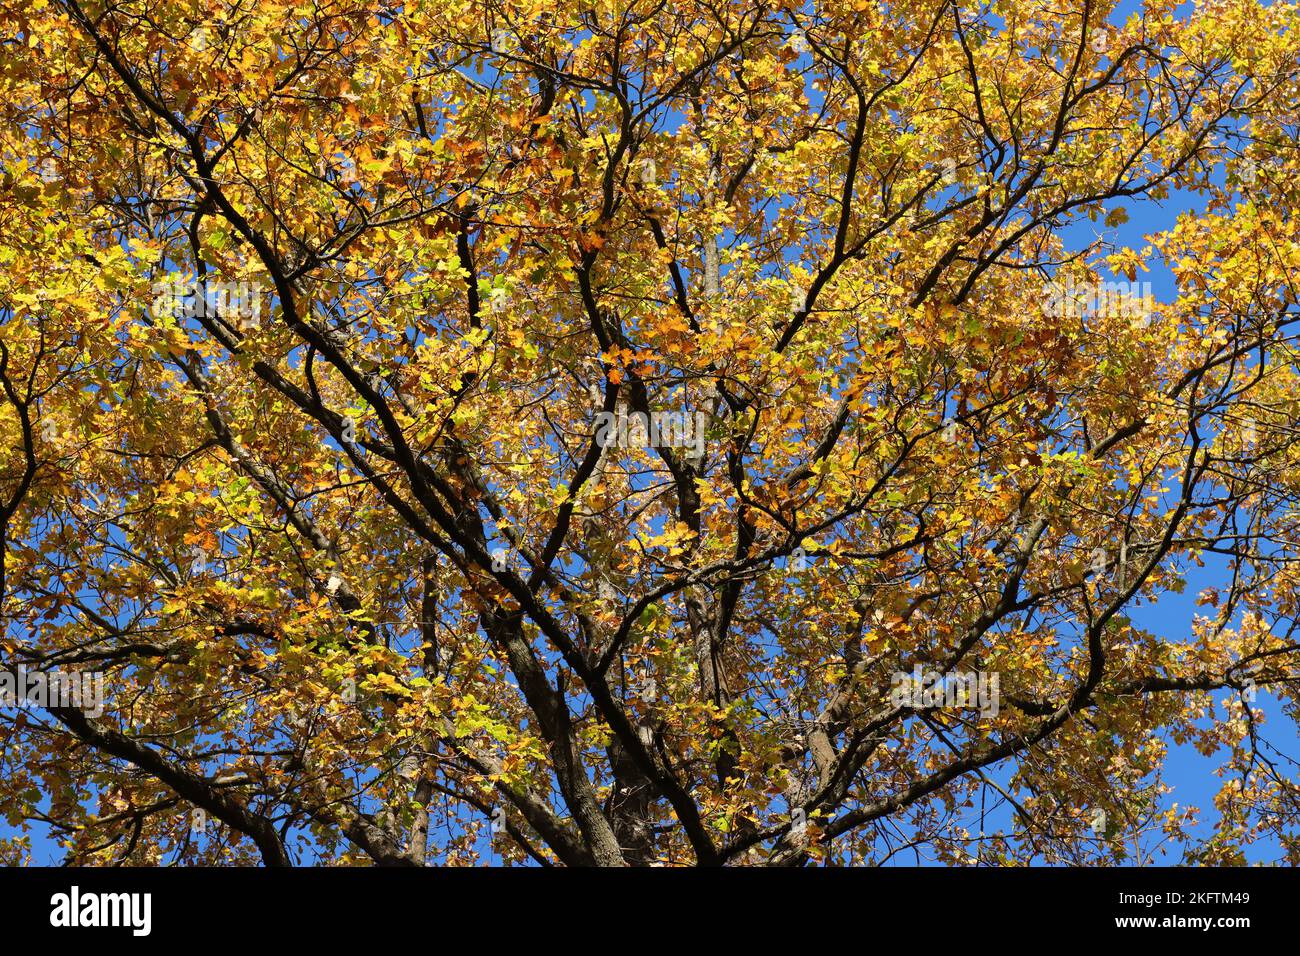 View from below into the branches of a mighty oak tree, which glows golden yellow in the autumn sun against a blue sky Stock Photo